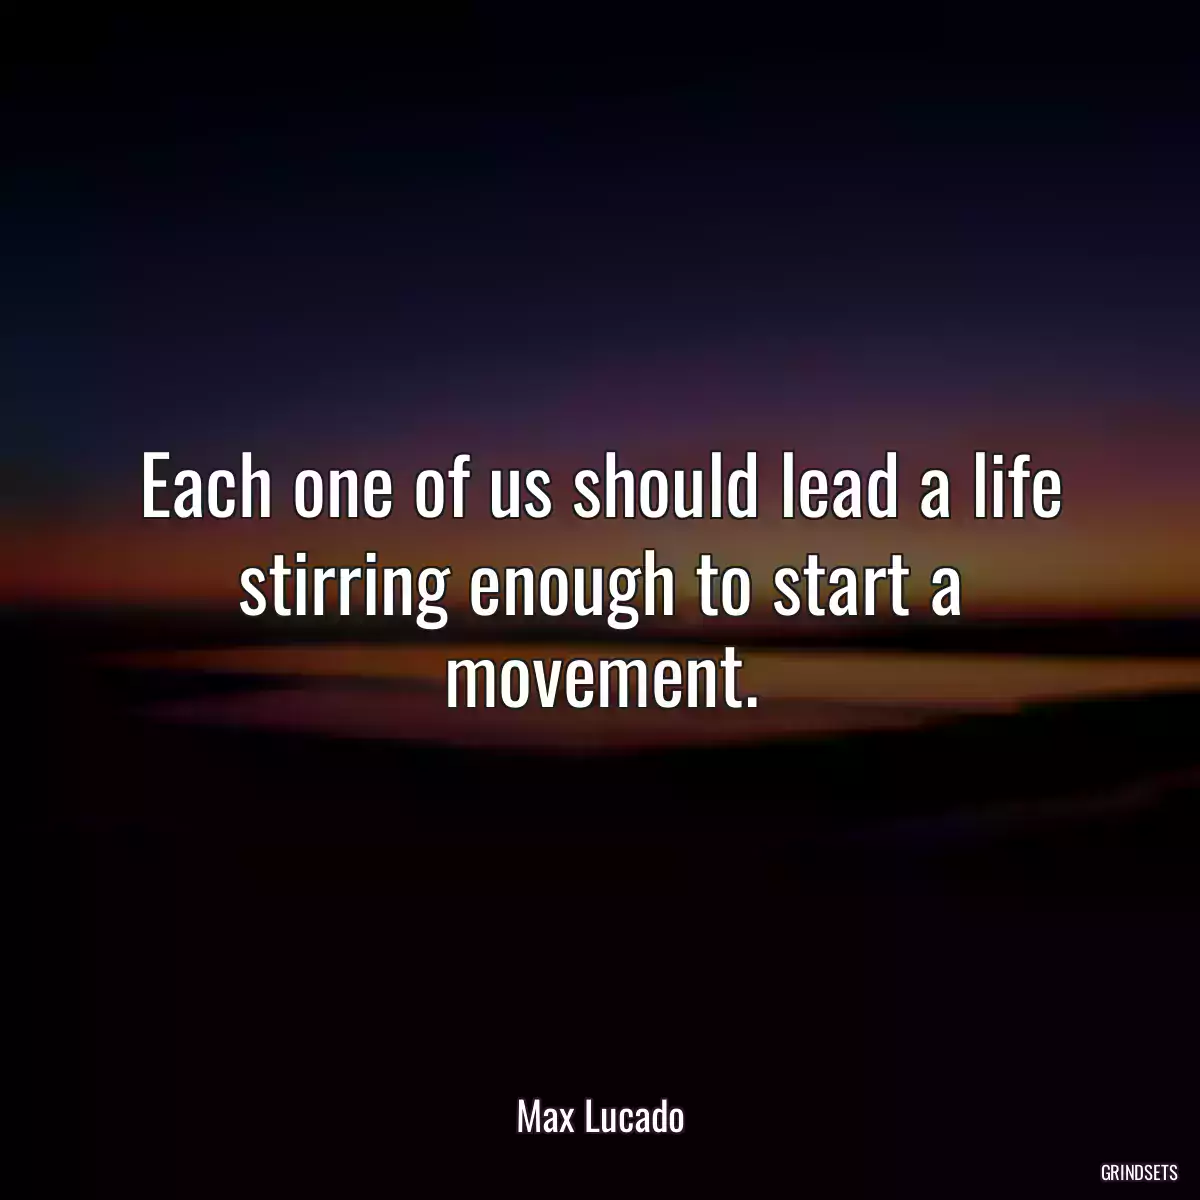 Each one of us should lead a life stirring enough to start a movement.